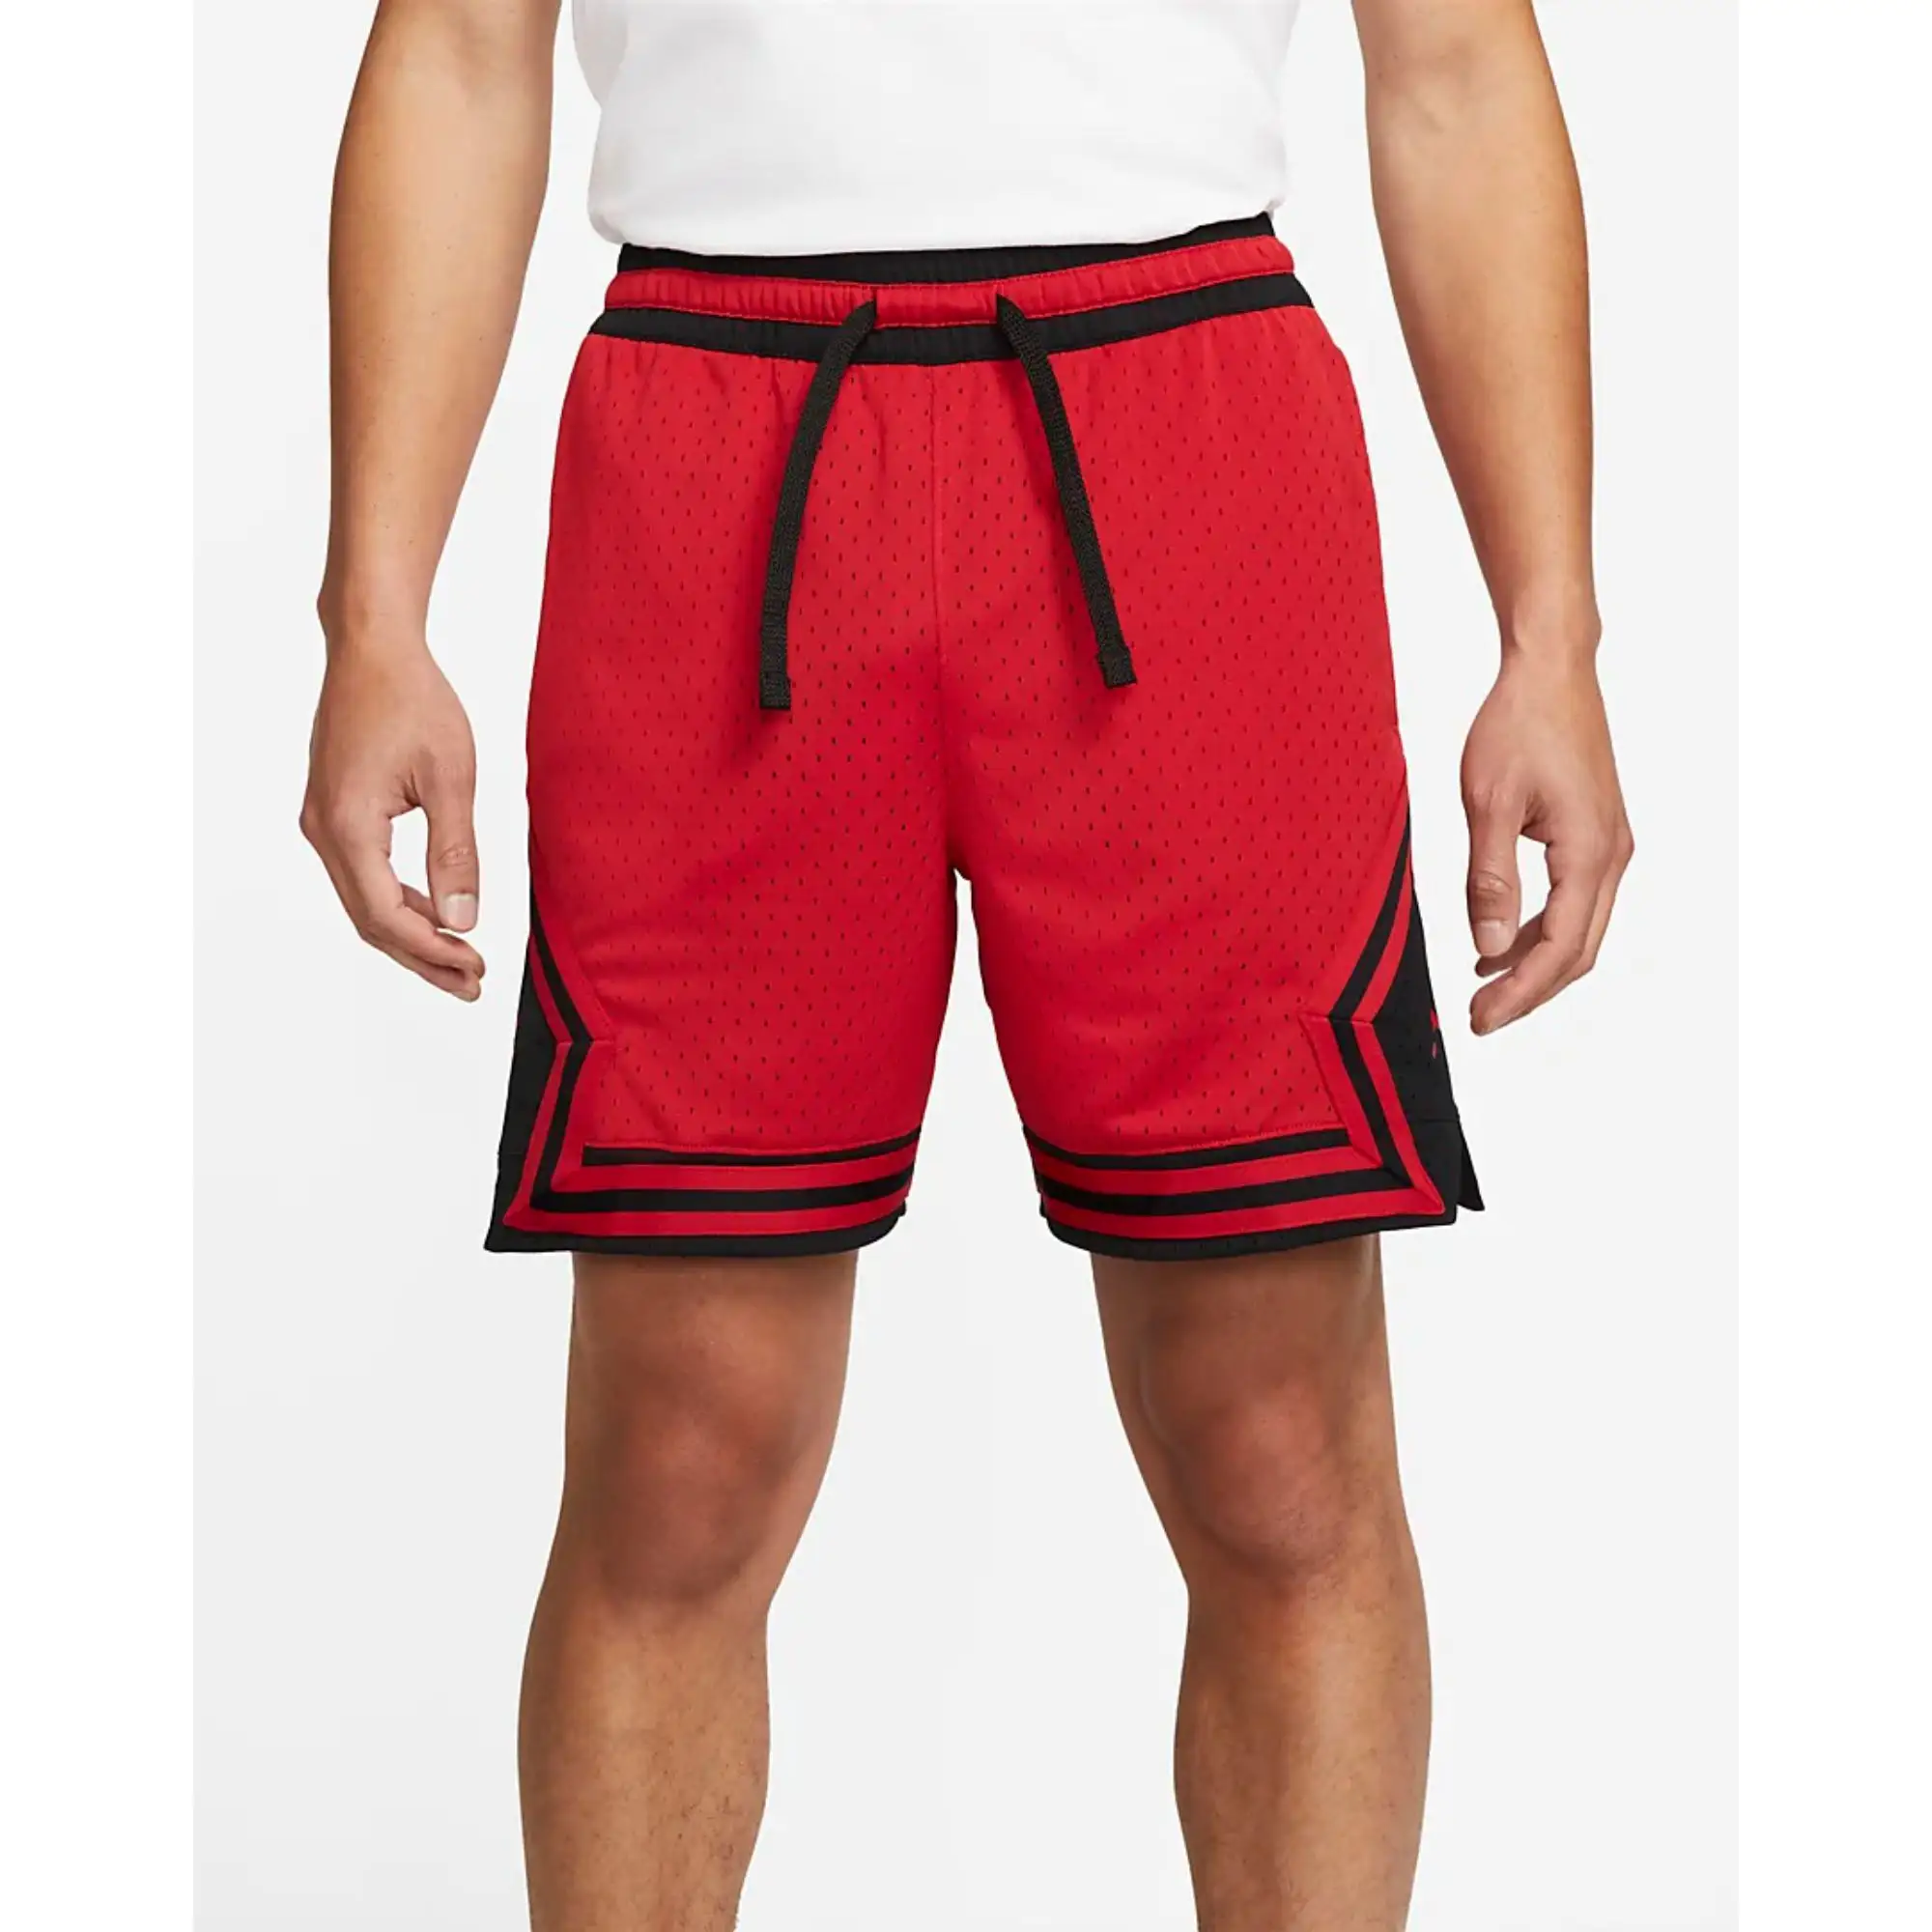 Dry and Comfortable 100% Polyester Mesh Bright Red & Black Mens Diamond Shorts with Elastic Waistband and Striped Knit Tape